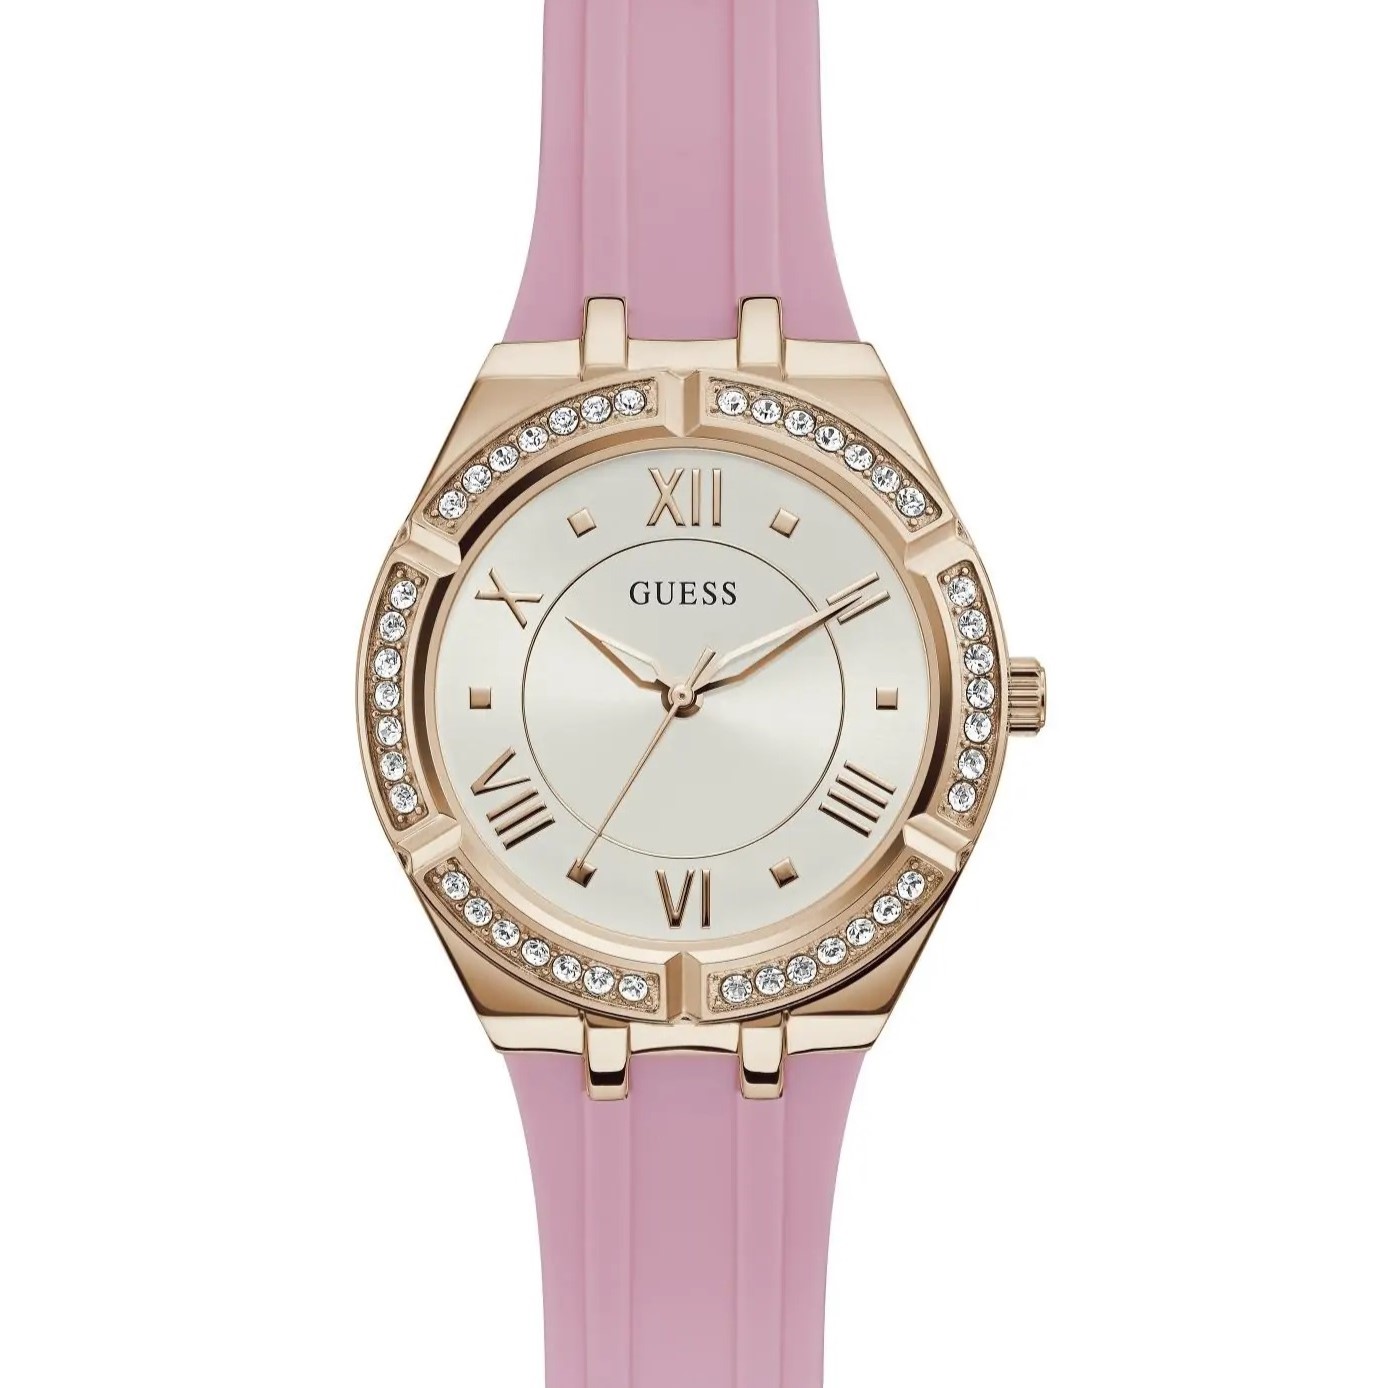 ĐỒNG HỒ NỮ ĐEO TAY GUESS LADIES PINK ROSE GOLD TONE ANALOG SILICONE STRAP WATCH GW0034L3 4